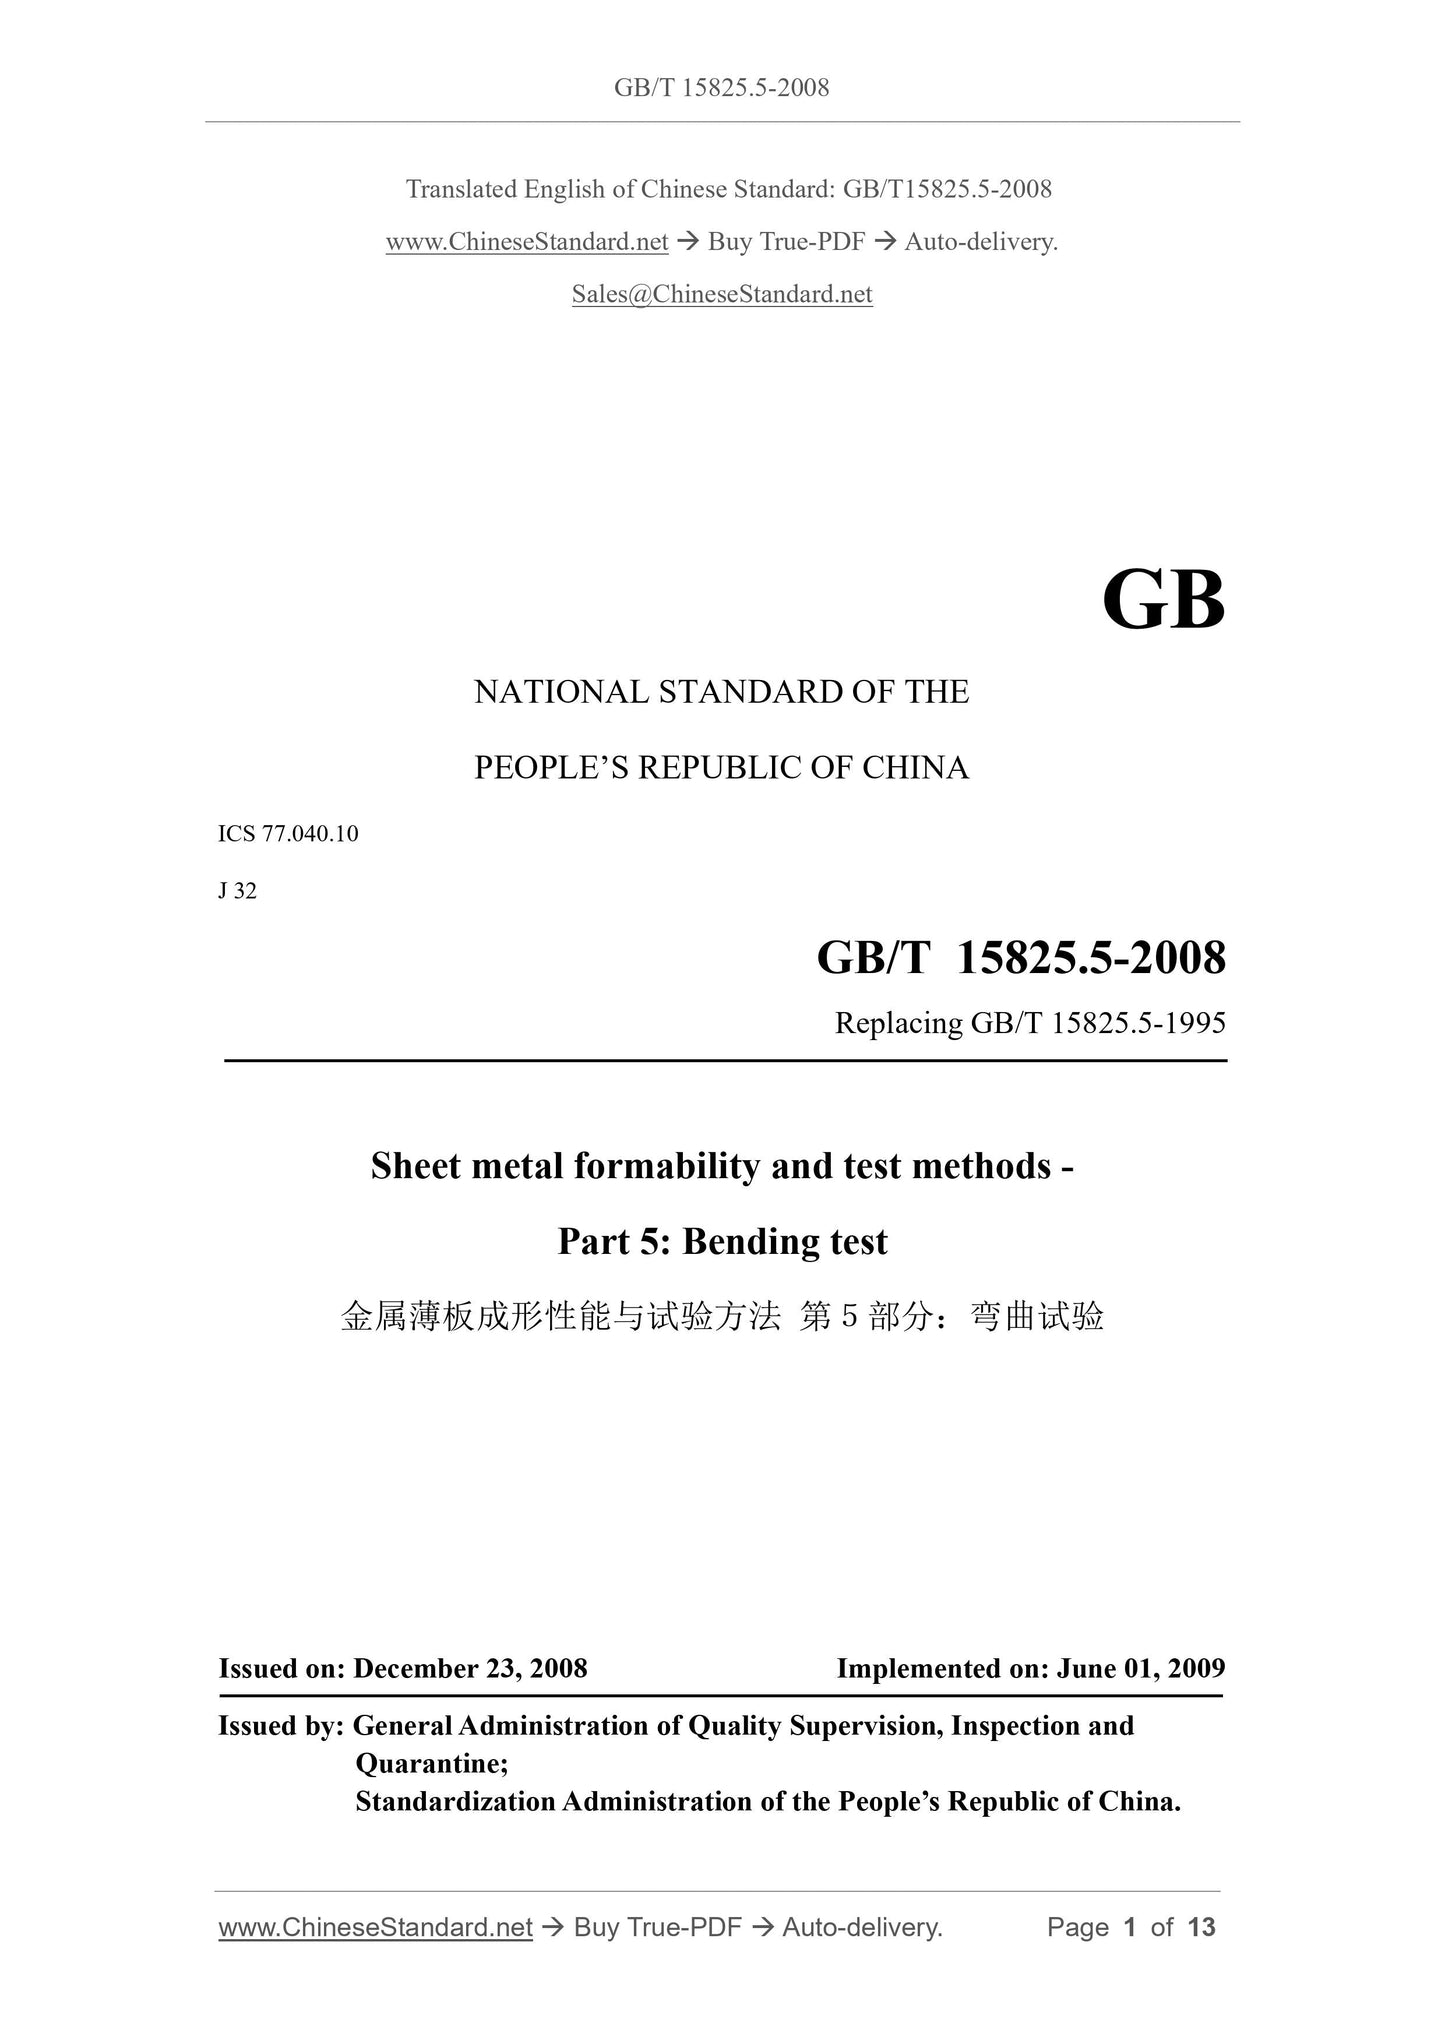 GB/T 15825.5-2008 Page 1